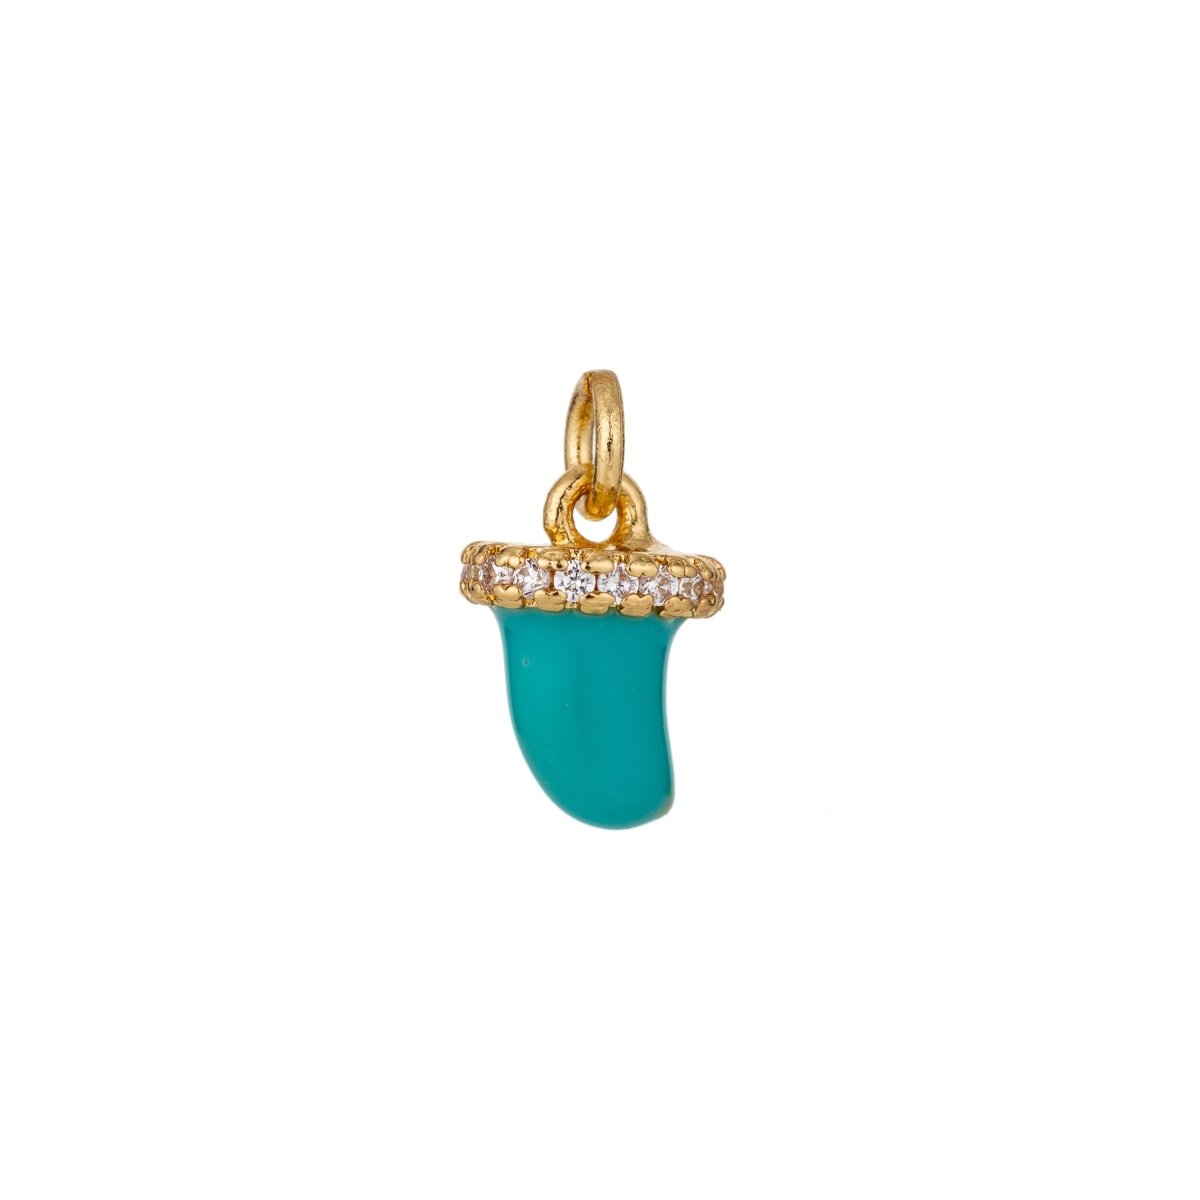 Dainty Tiny Tusk Drop Charm, Dainty Horn Turquoise Charms with CZ for Bracelet Earring Necklace Jewelry Making Supply Gold Filled, C433 - DLUXCA